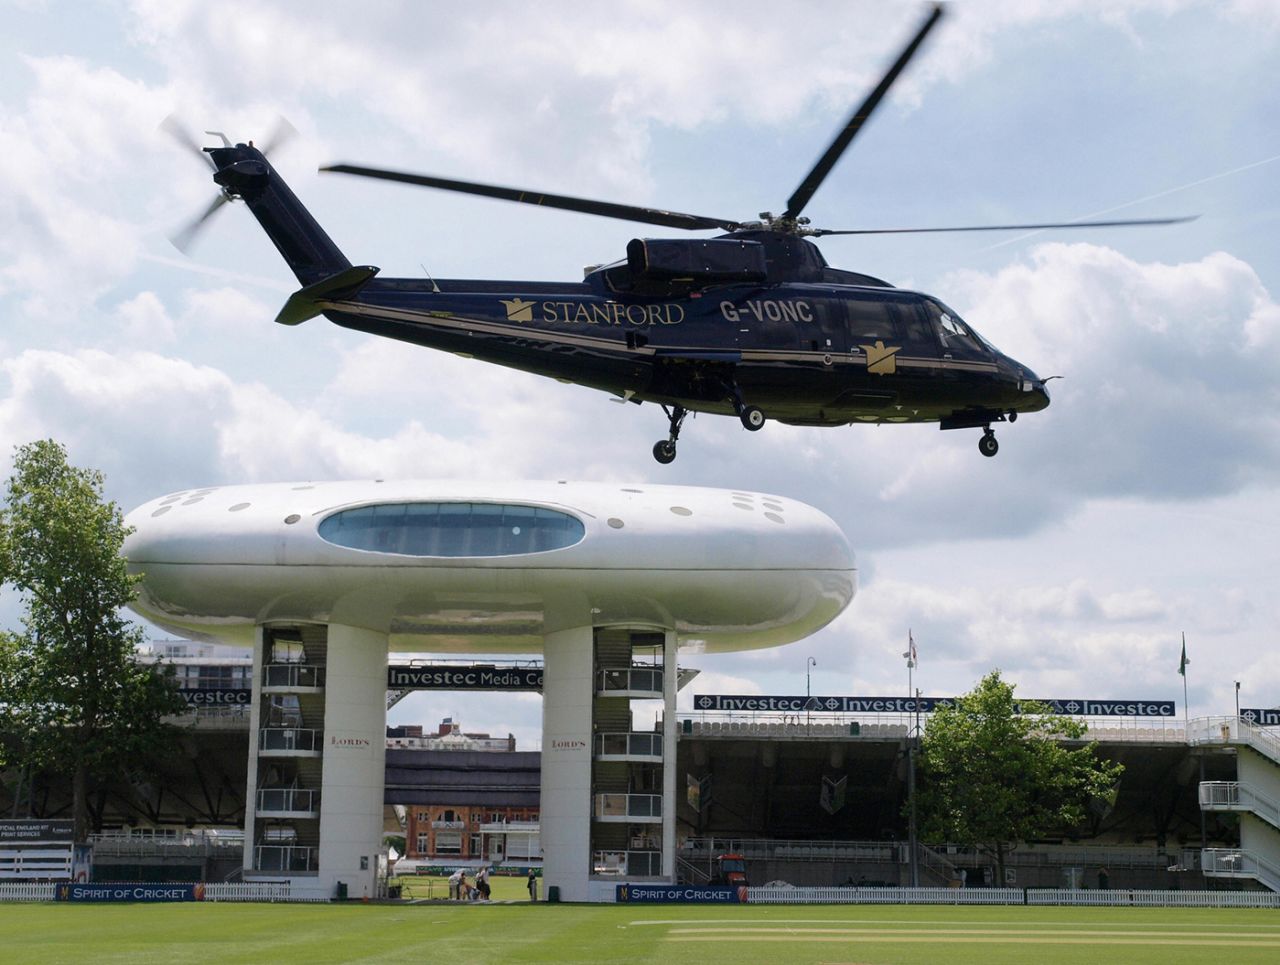 Allen Stanford's helicopter takes off after depositing him at Lord's, Lord's, June 11, 2008